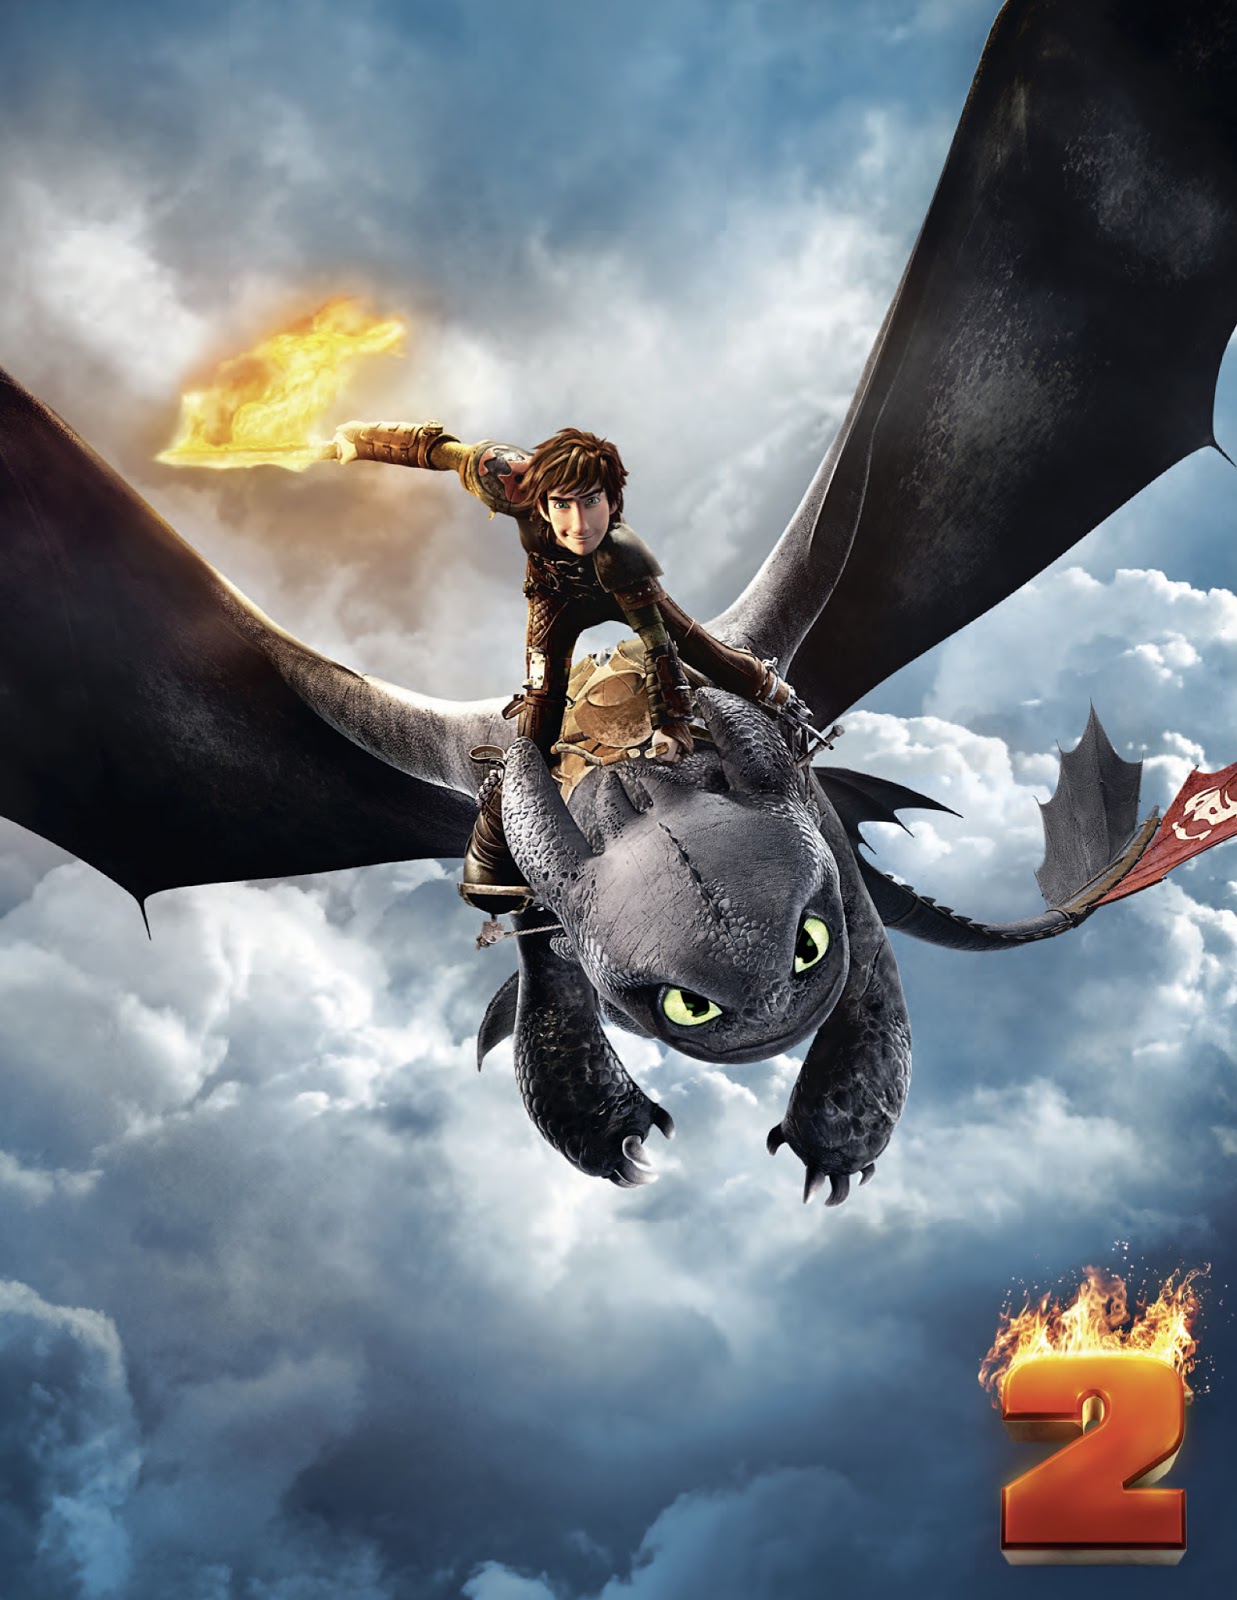 How To Train Your Dragon 2 Teaser Poster